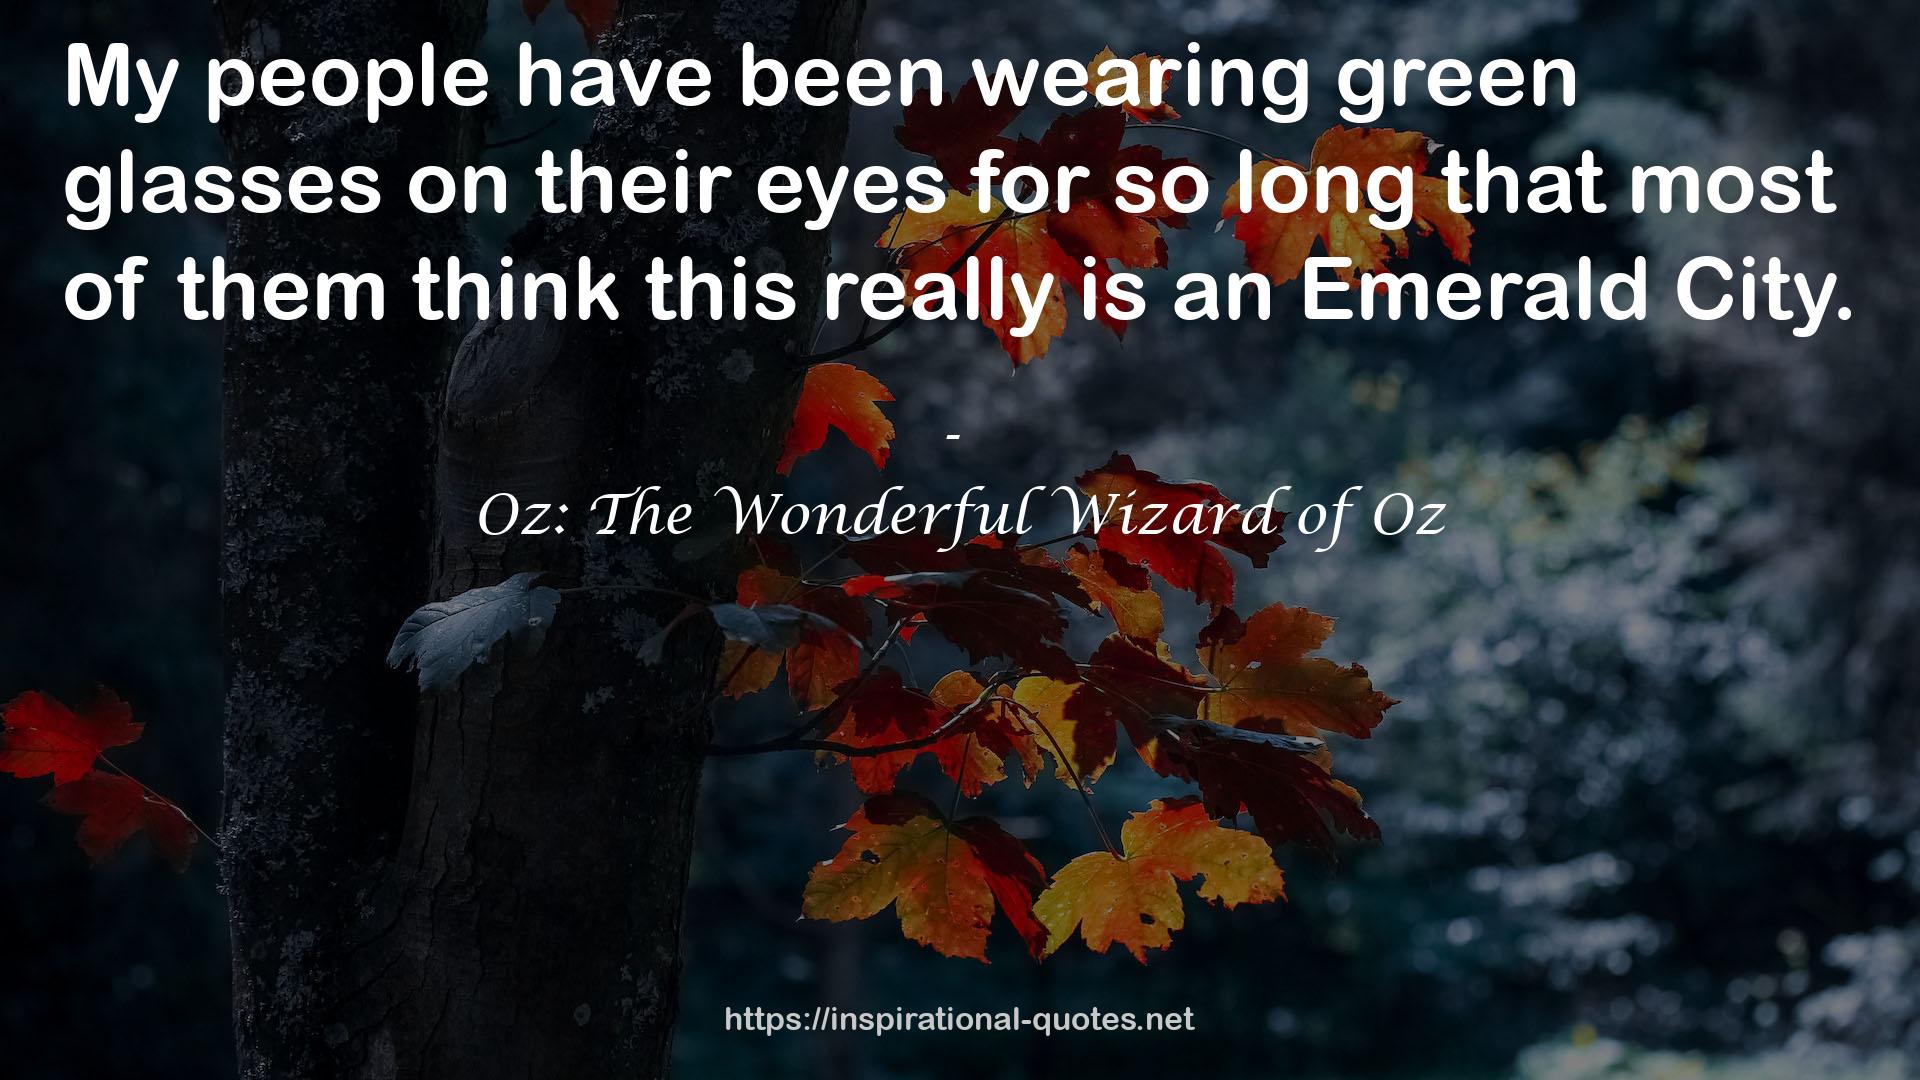 Oz: The Wonderful Wizard of Oz QUOTES